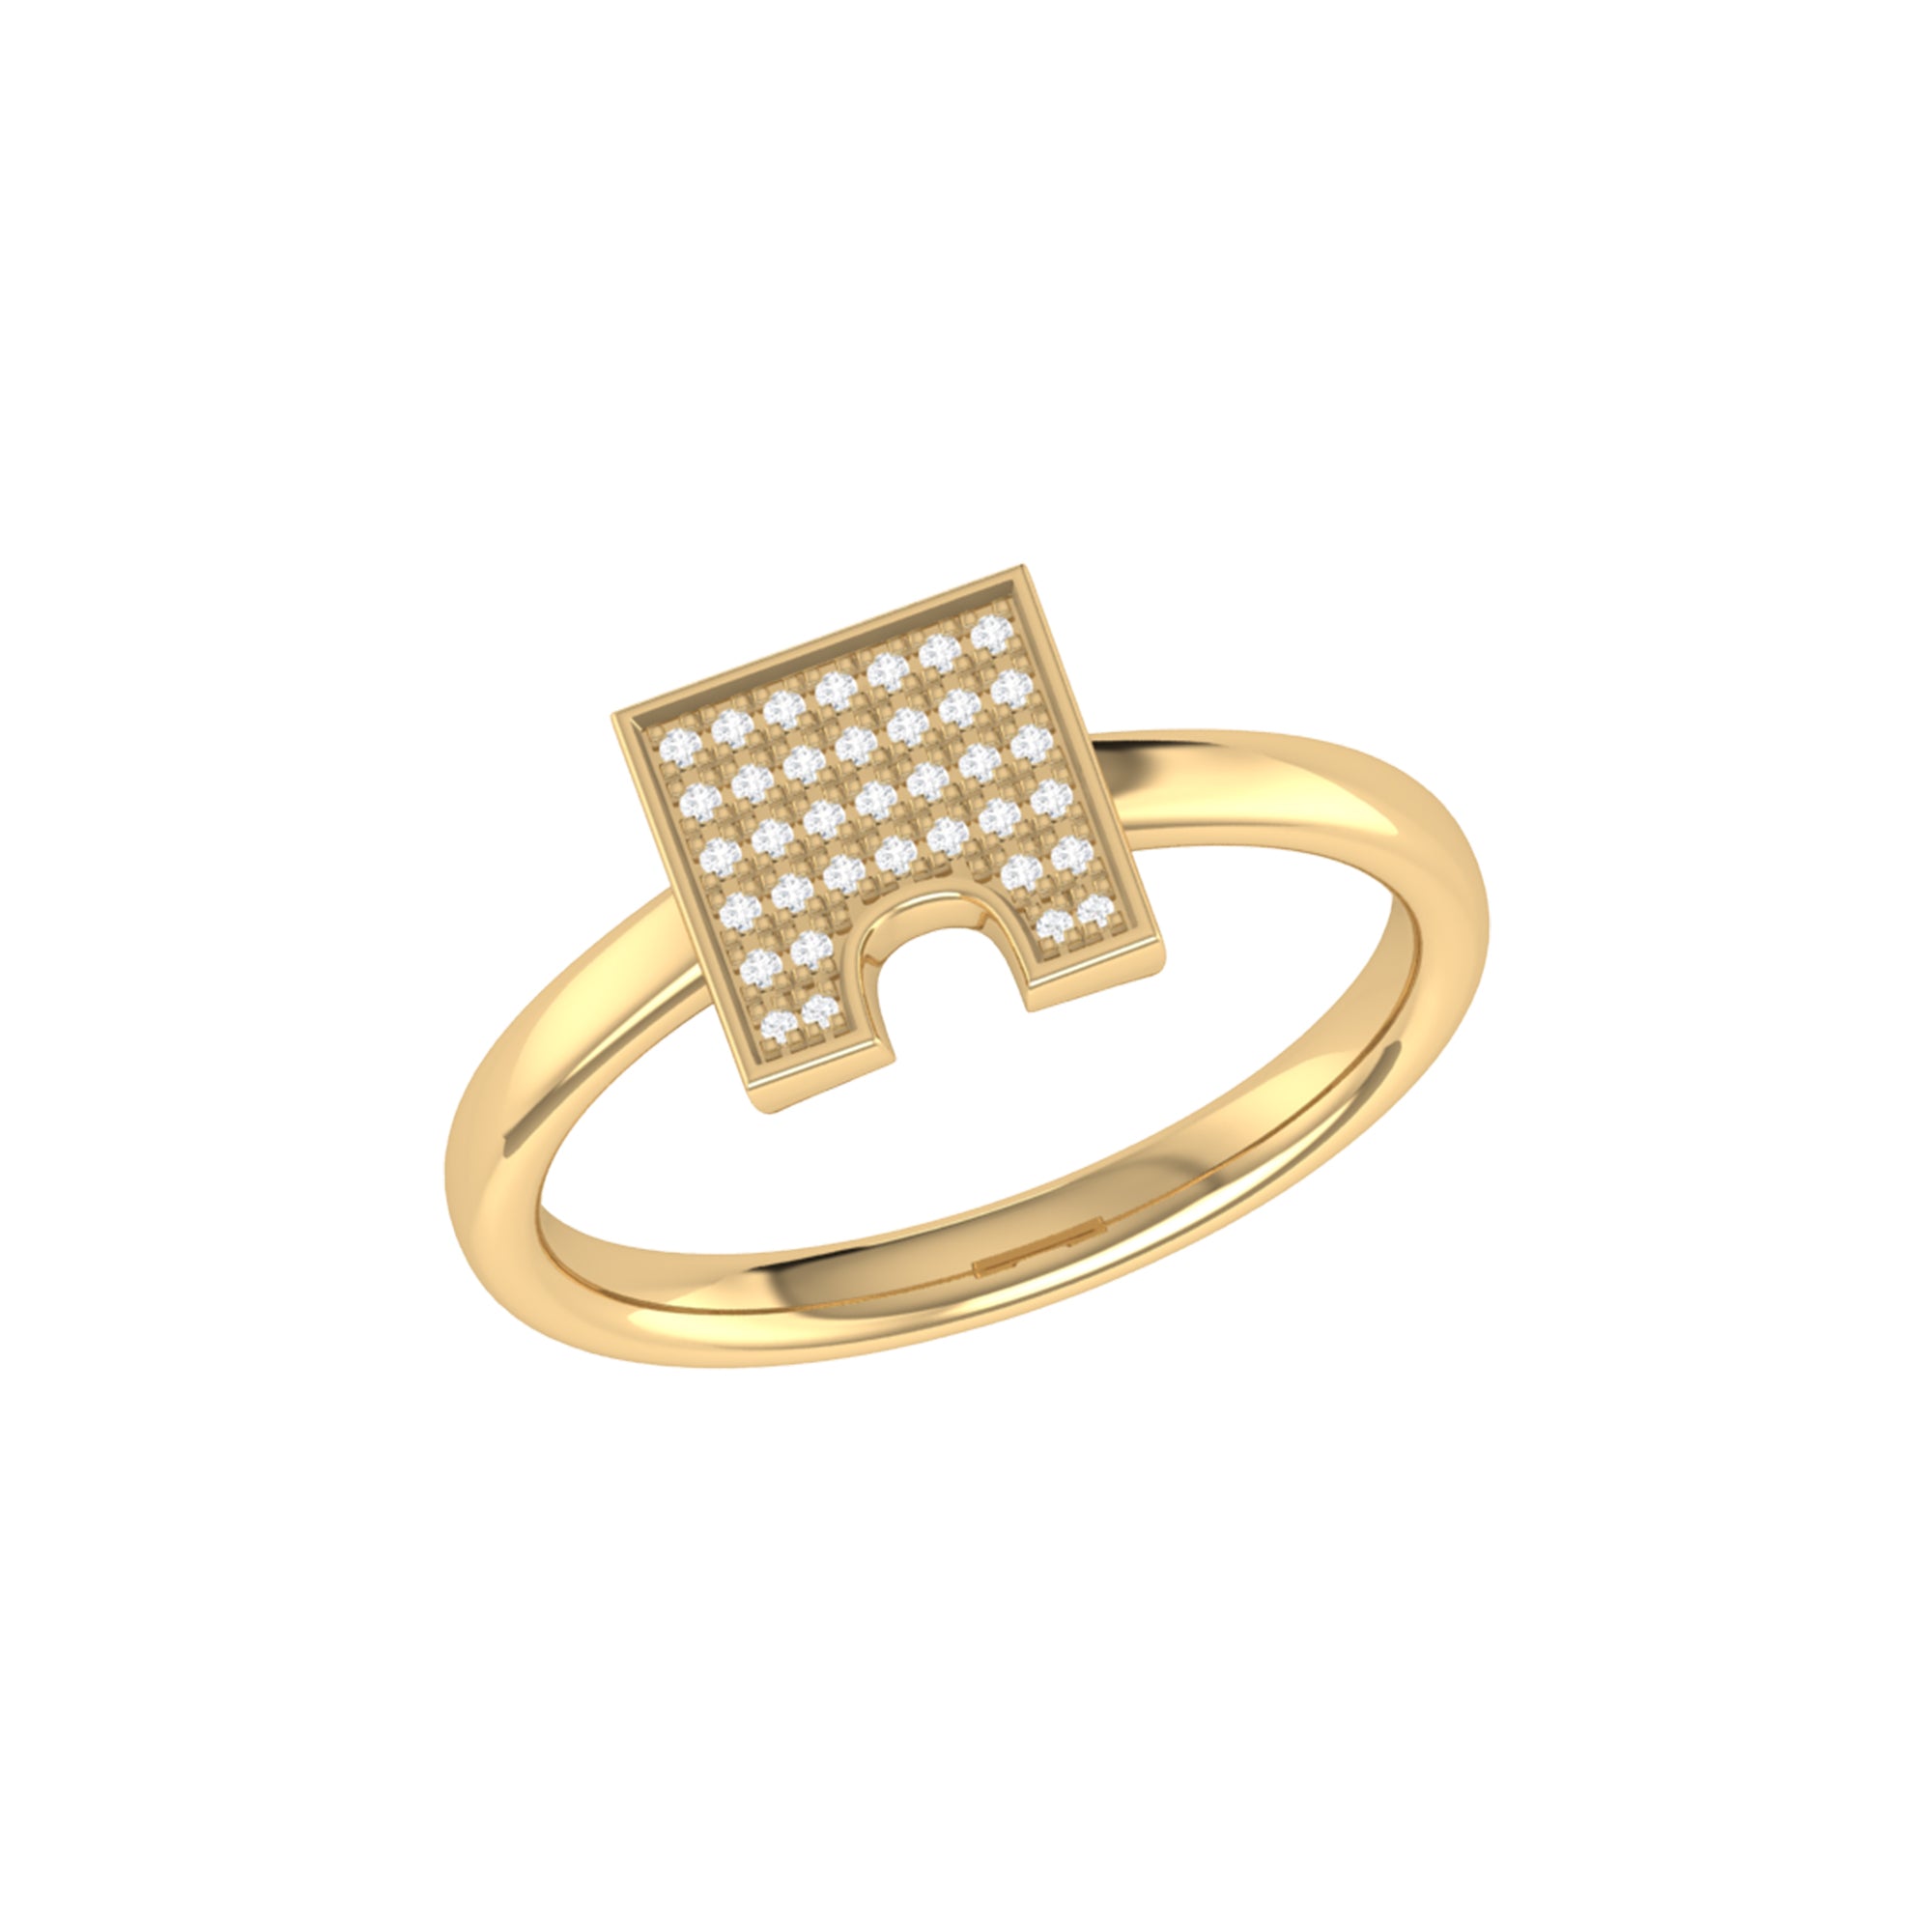 City Arches Square Diamond Ring in 14K Yellow Gold Vermeil on Sterling Silver